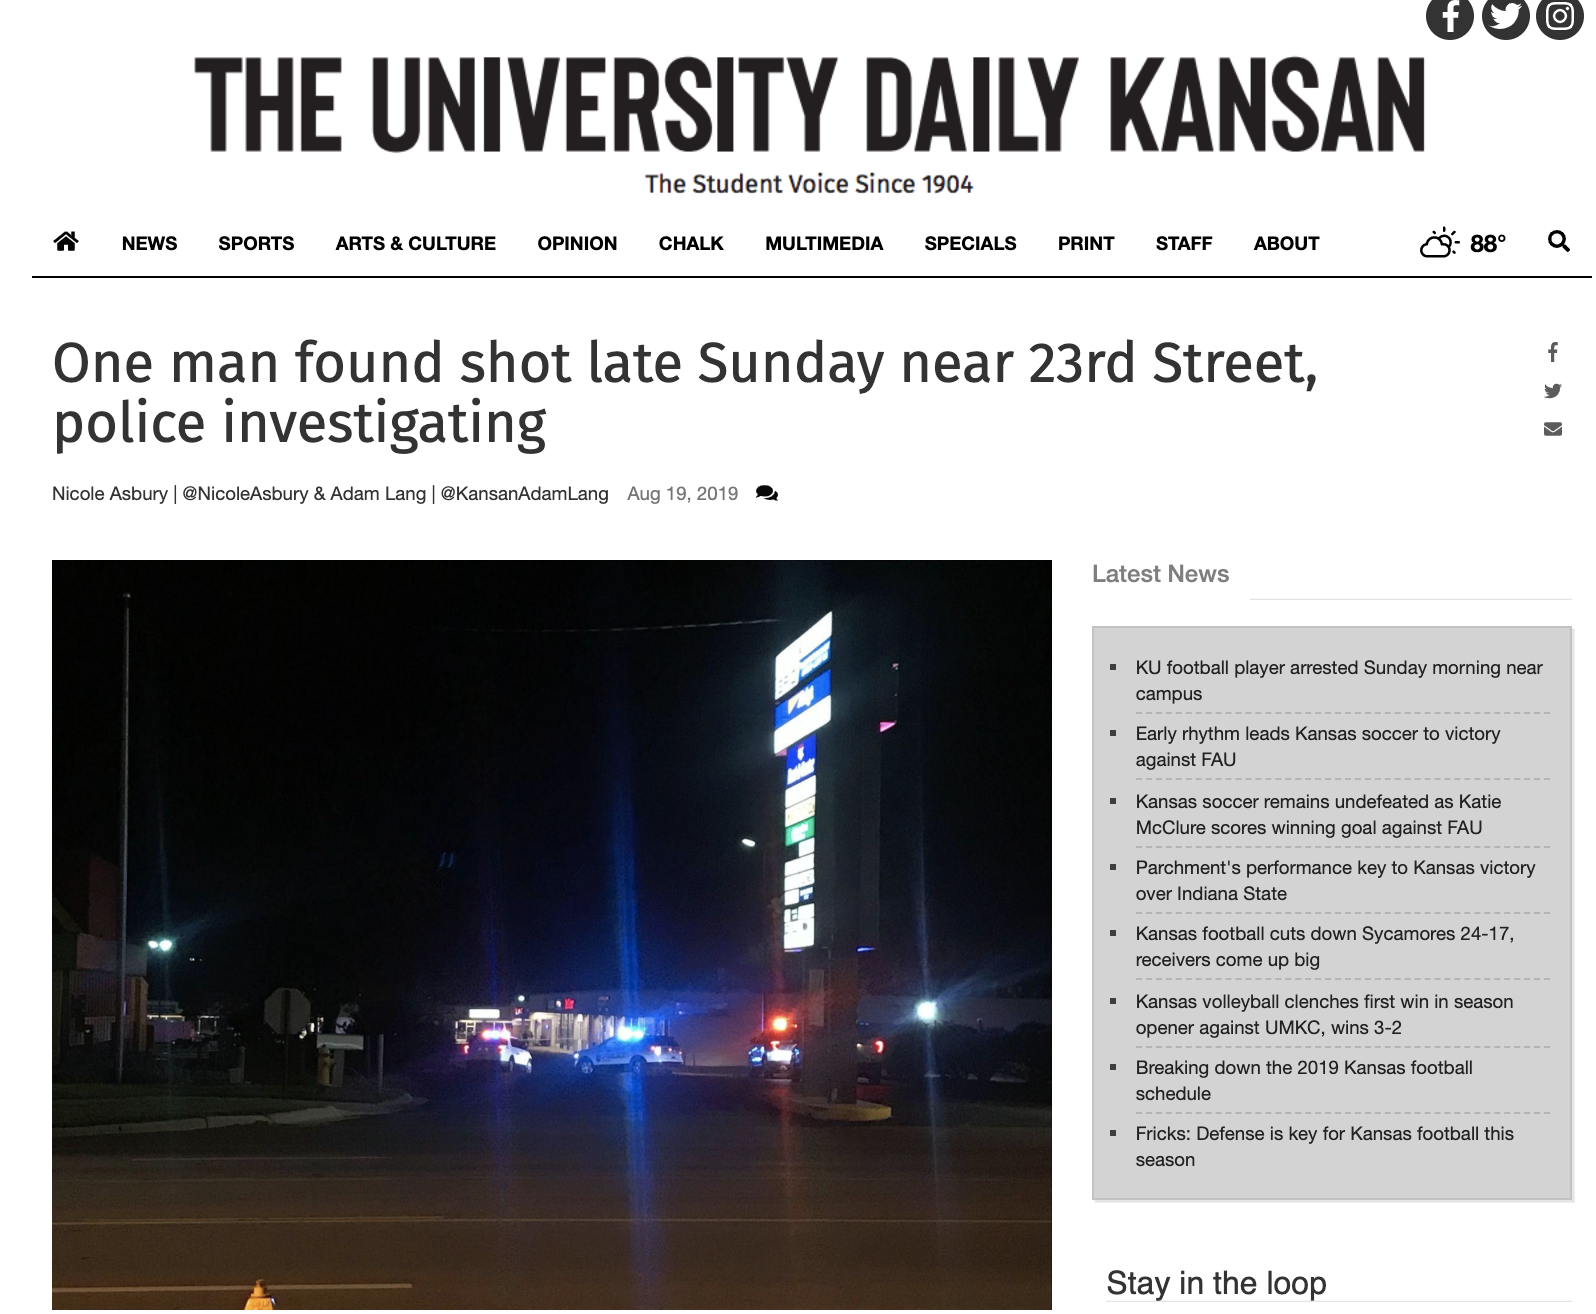 Nicole Asbury's breaking news story of a shooting in downtown Lawrence, KS